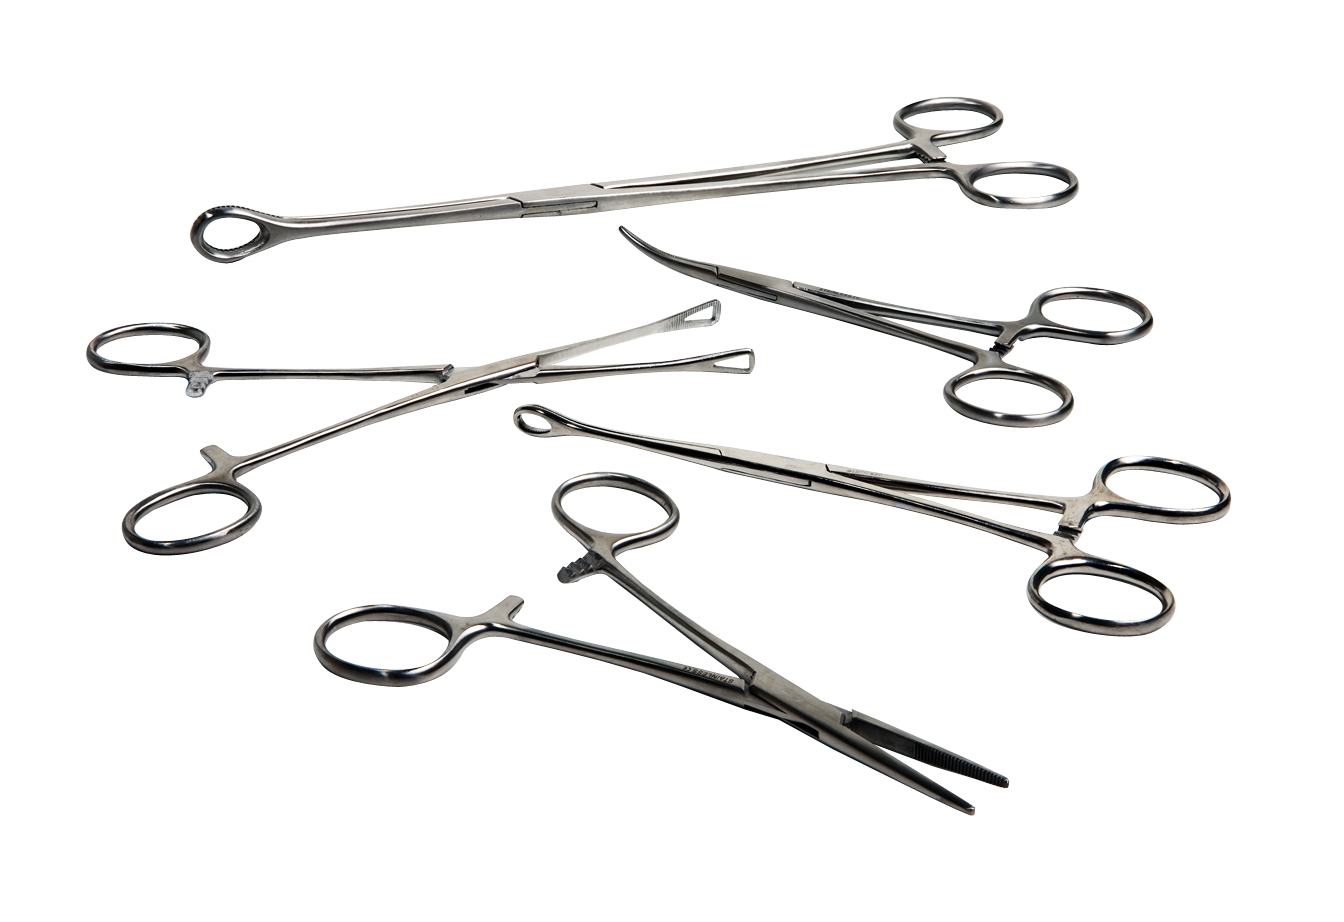 Medical Instruments by Miltex/Integra - Professional Instruments and Skylar